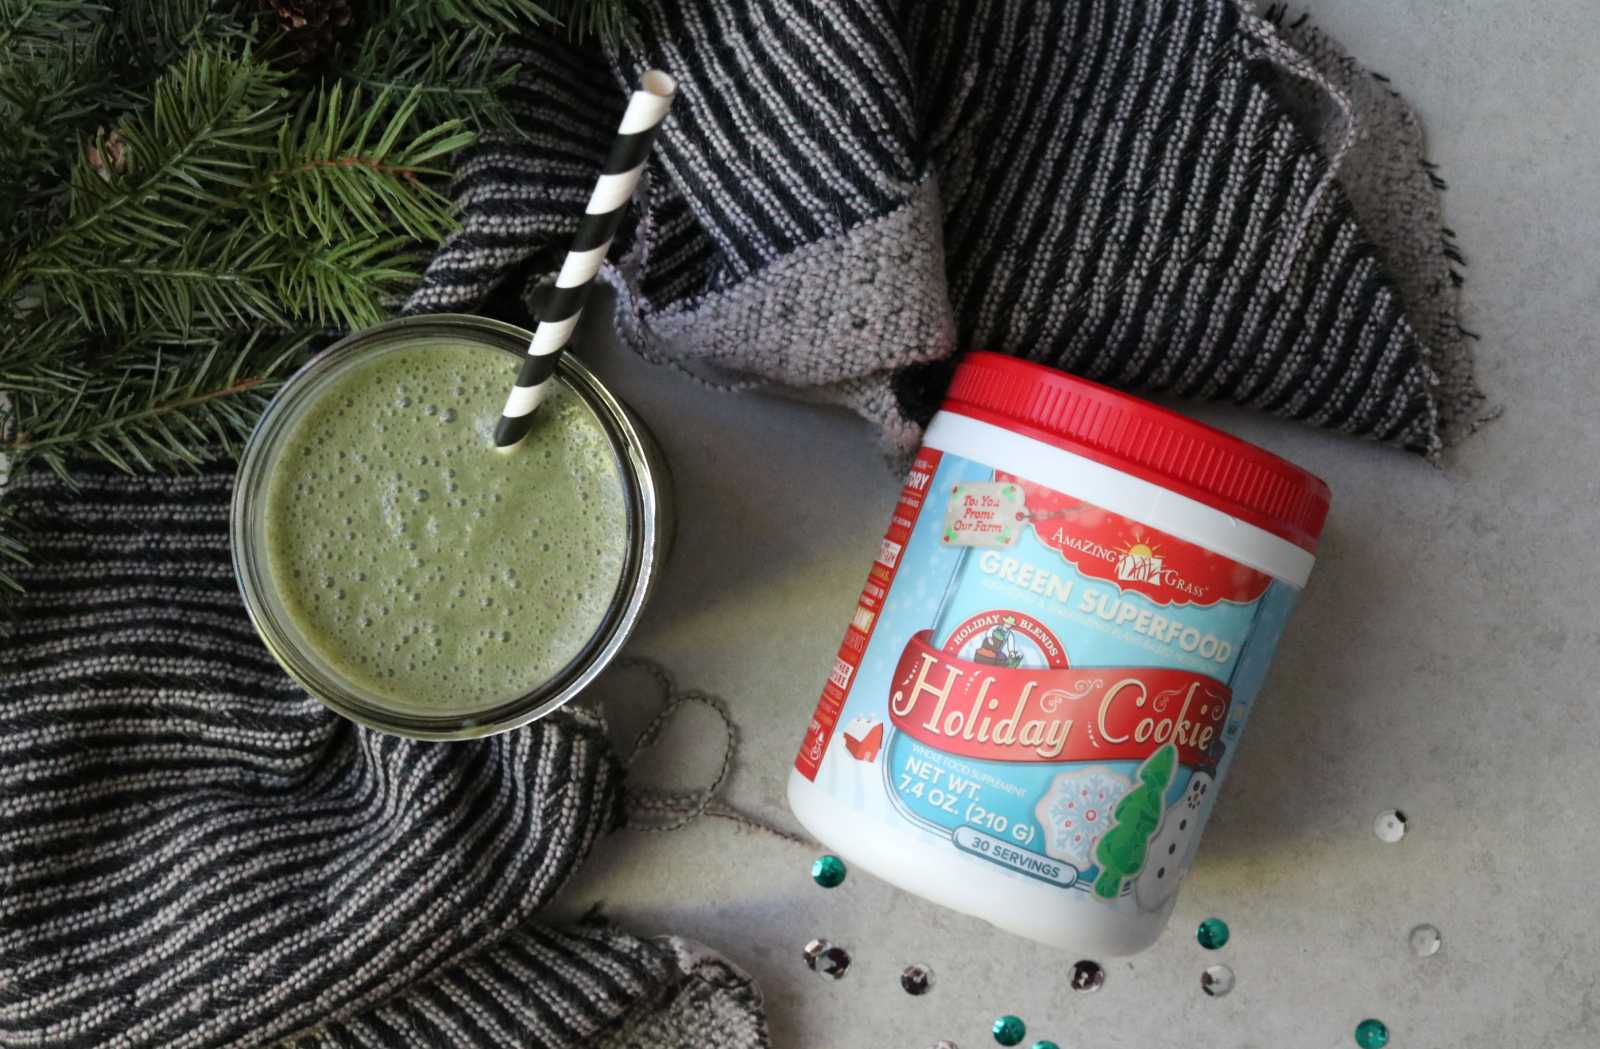 Recipe: Holiday Cookie Green Smoothie